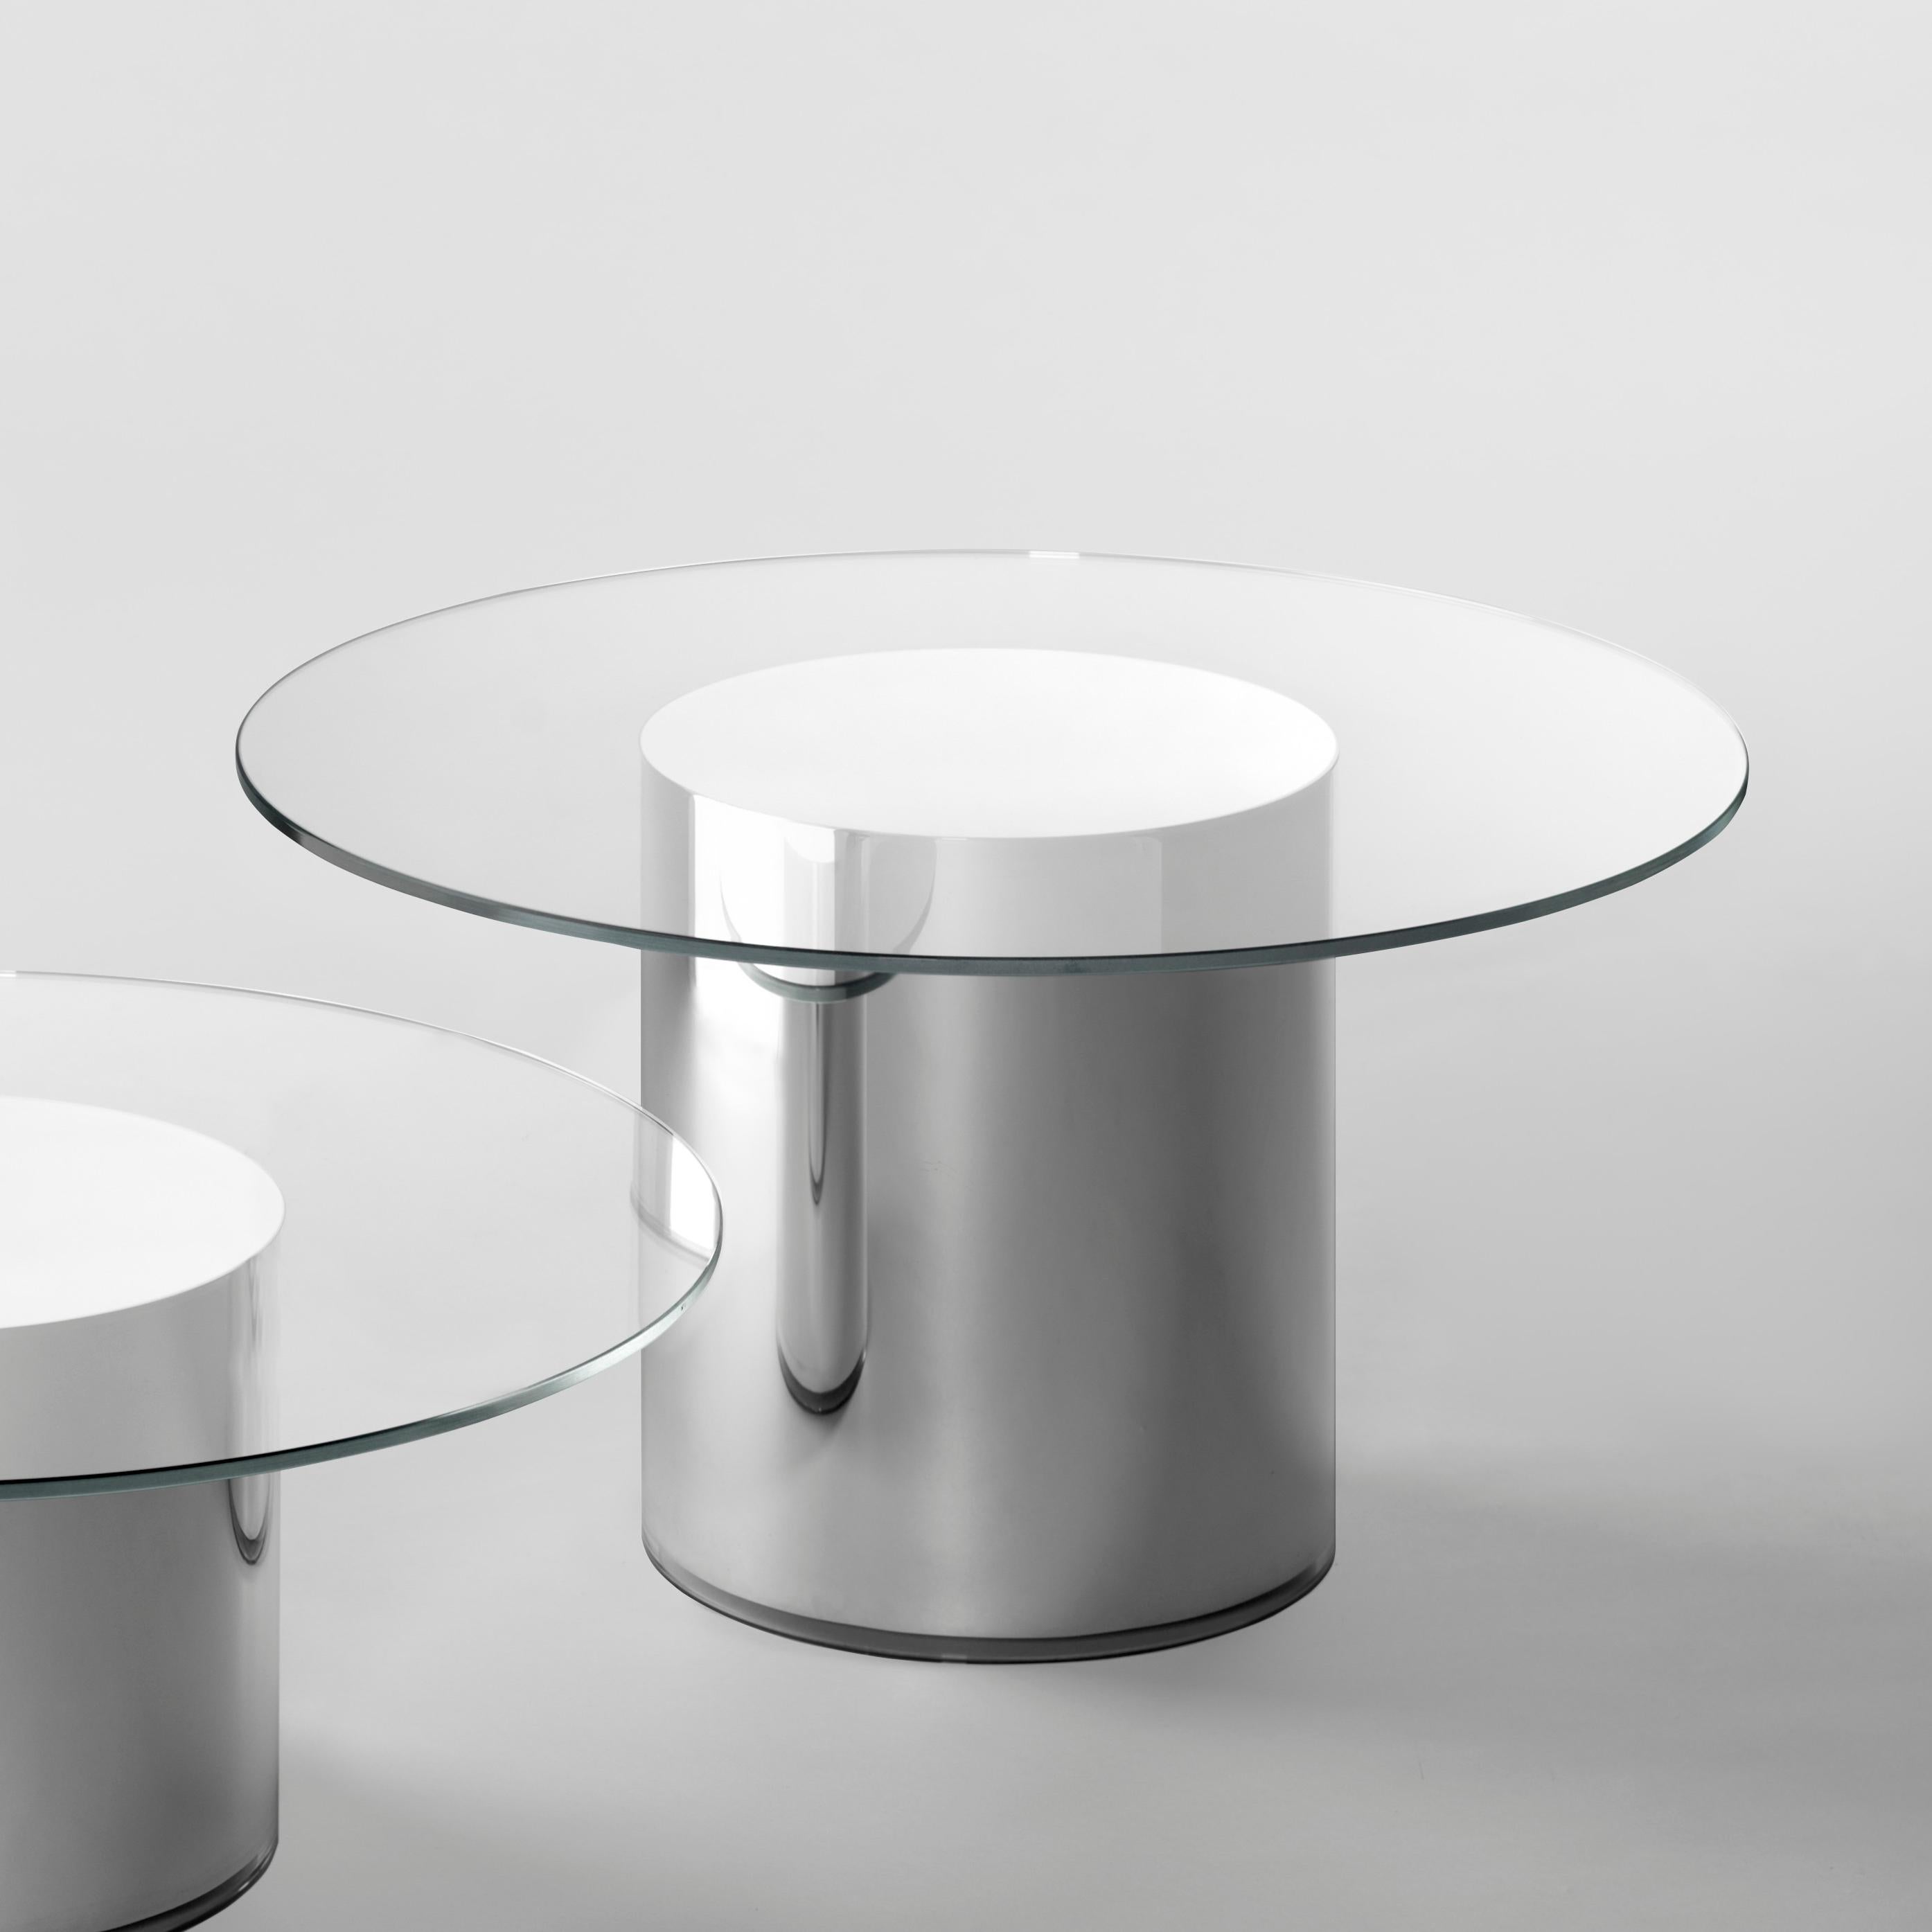 The 2001 Side Tables are made from an ultra-clear glass and a pyrex tube mirrored base, having no joinings. The metallic brilliance creates an optical illusion, evoking a perfect future not belonging to the past.

Ultra-clear tempered glass top and